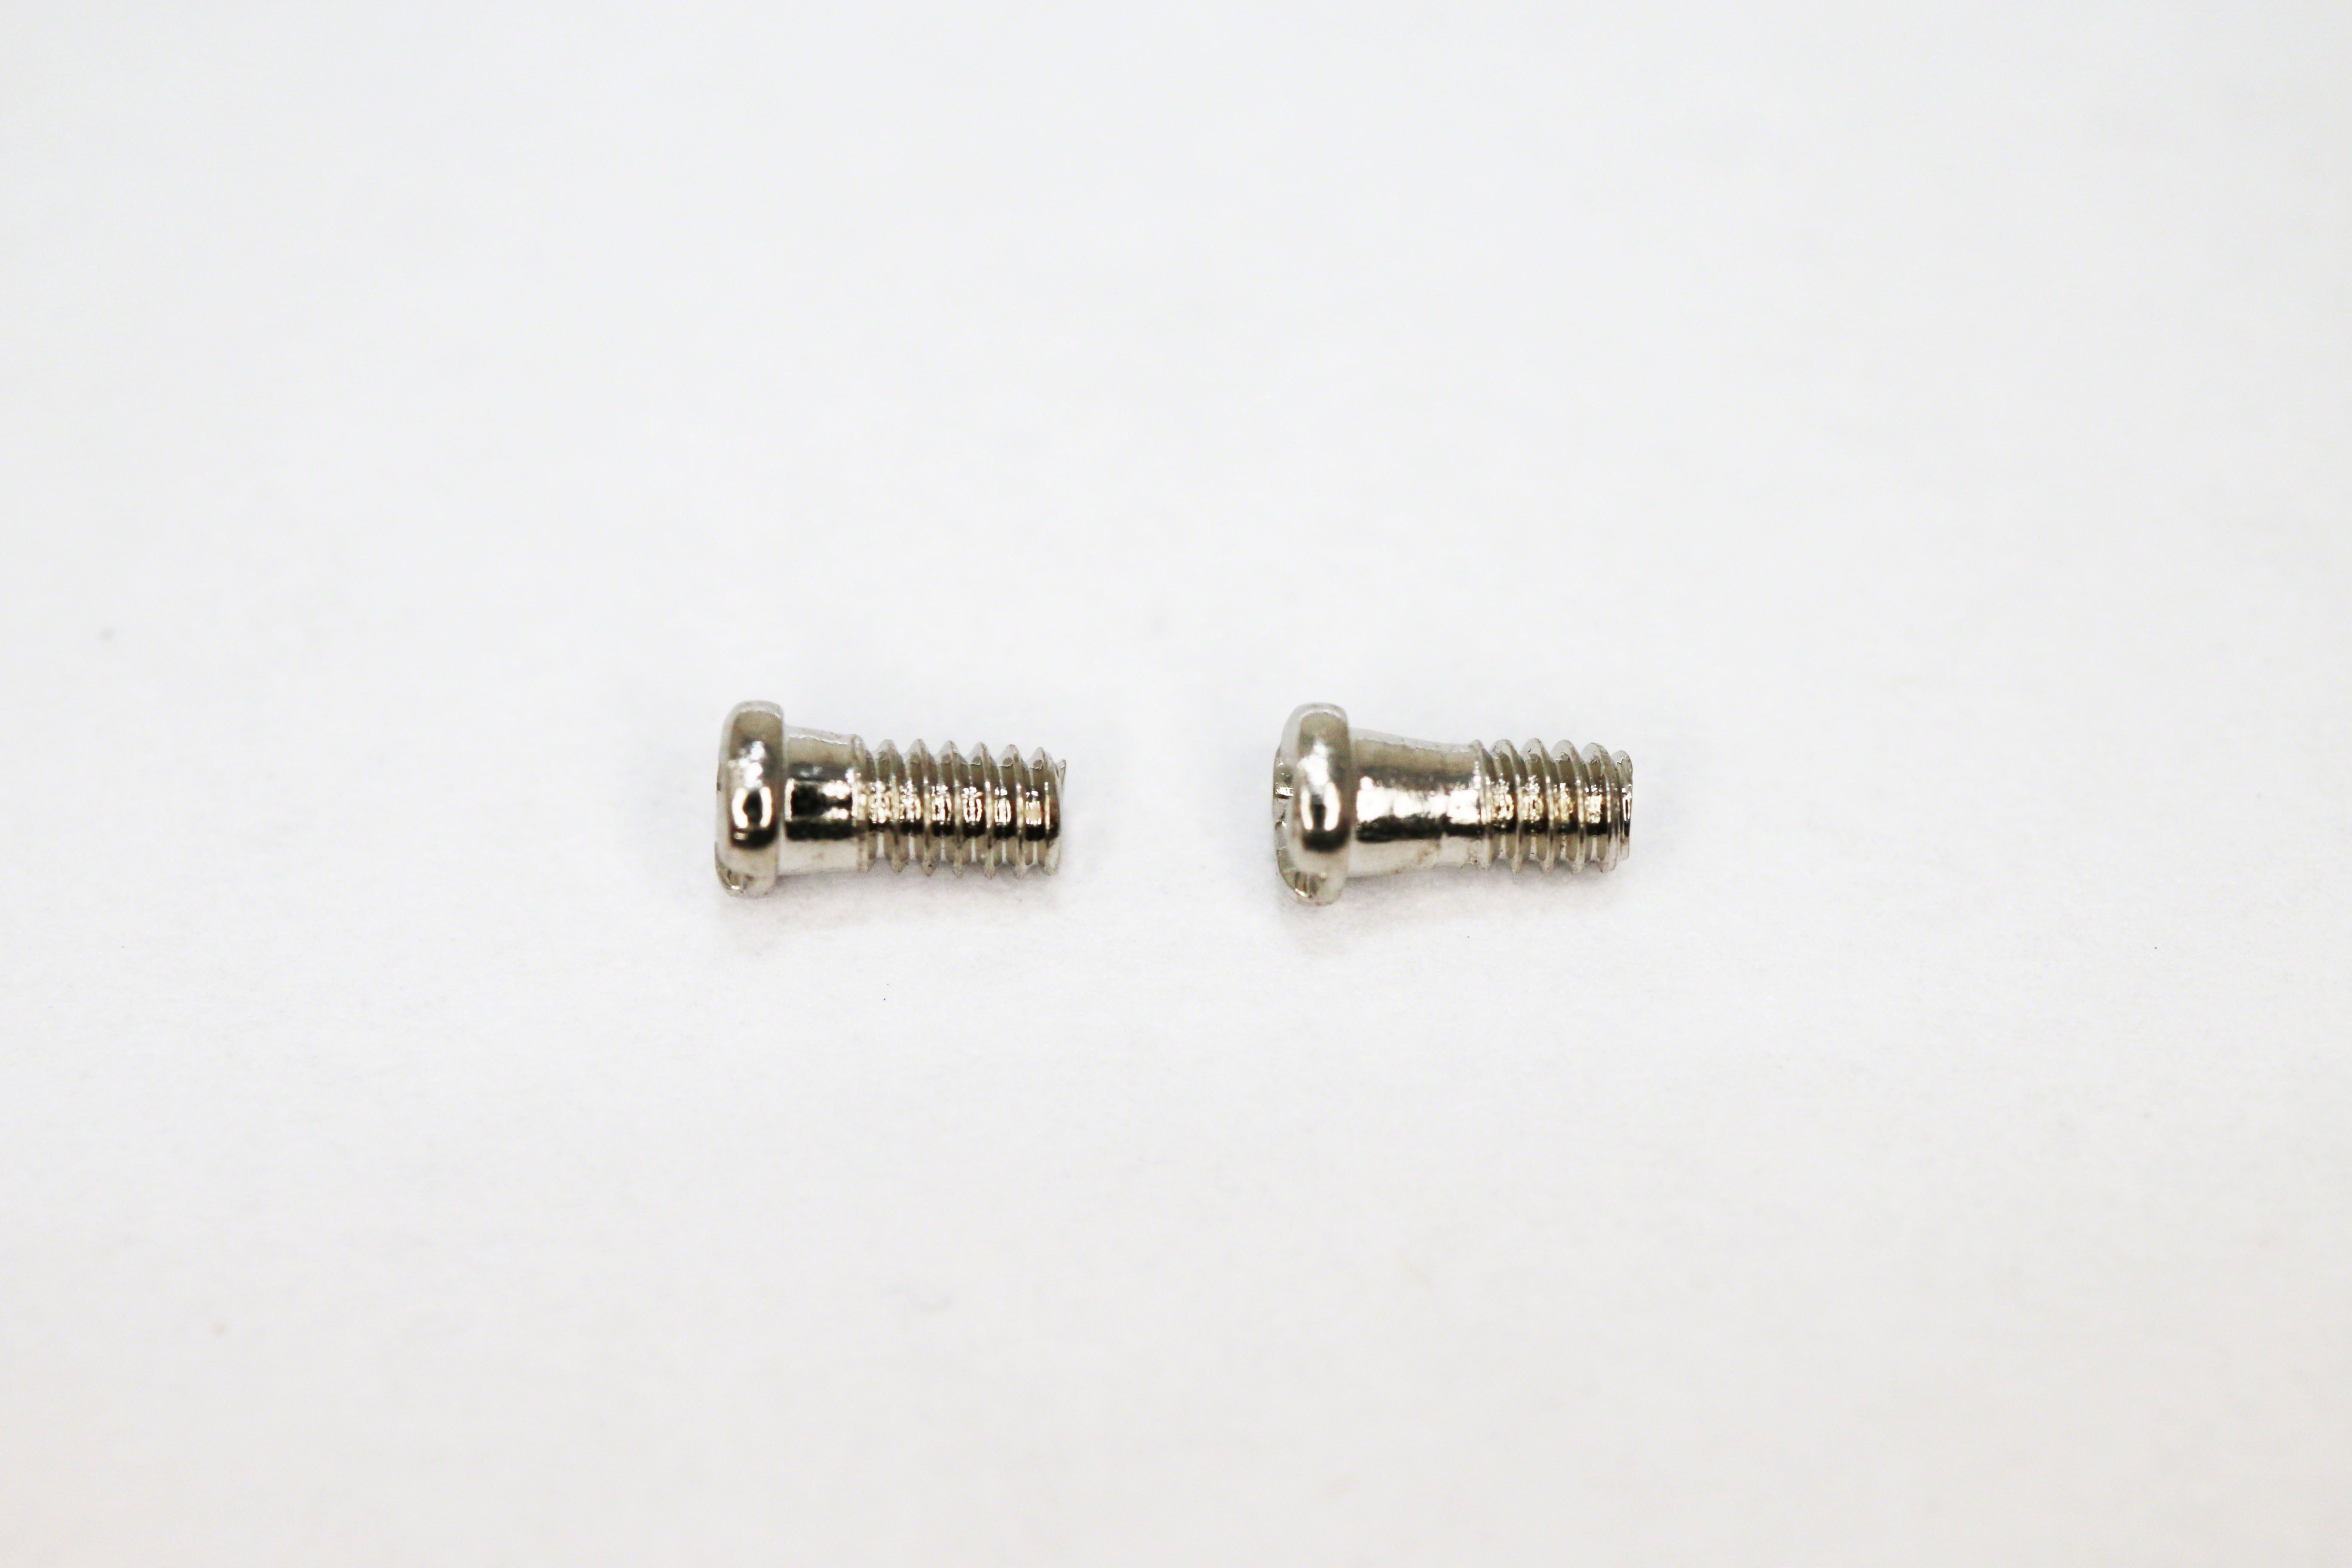 General question about Chanel screws